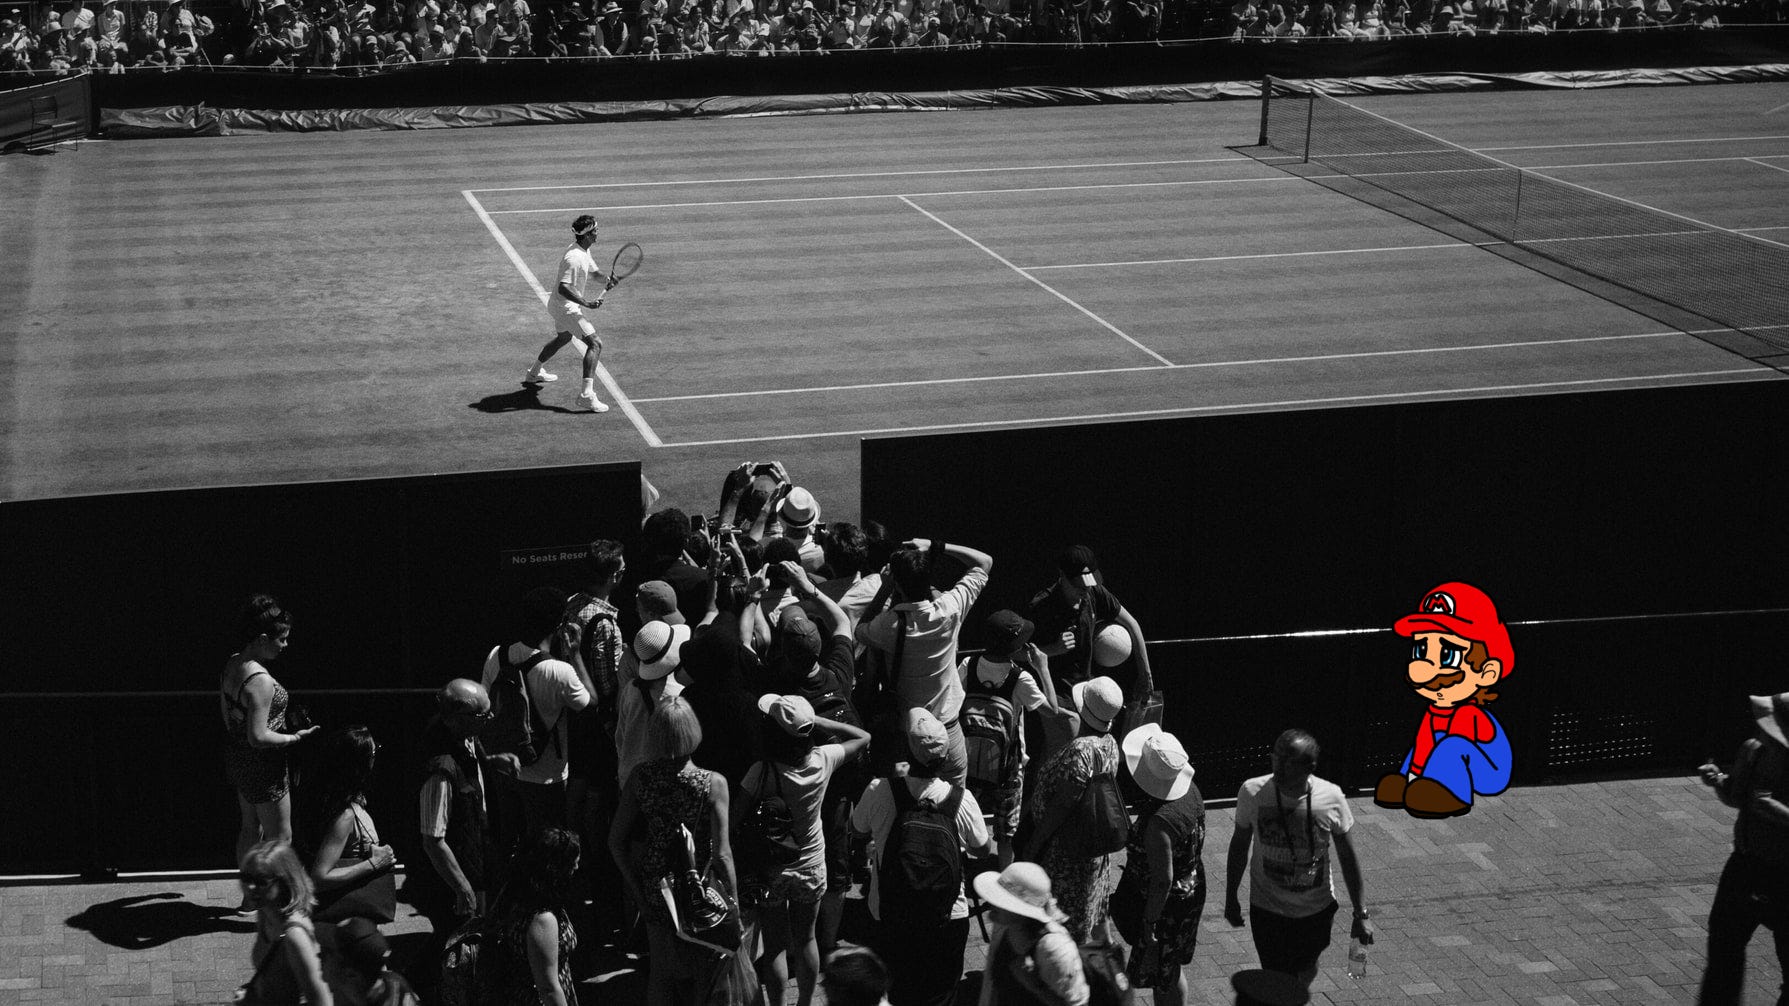 The Modernisation Of Tennis